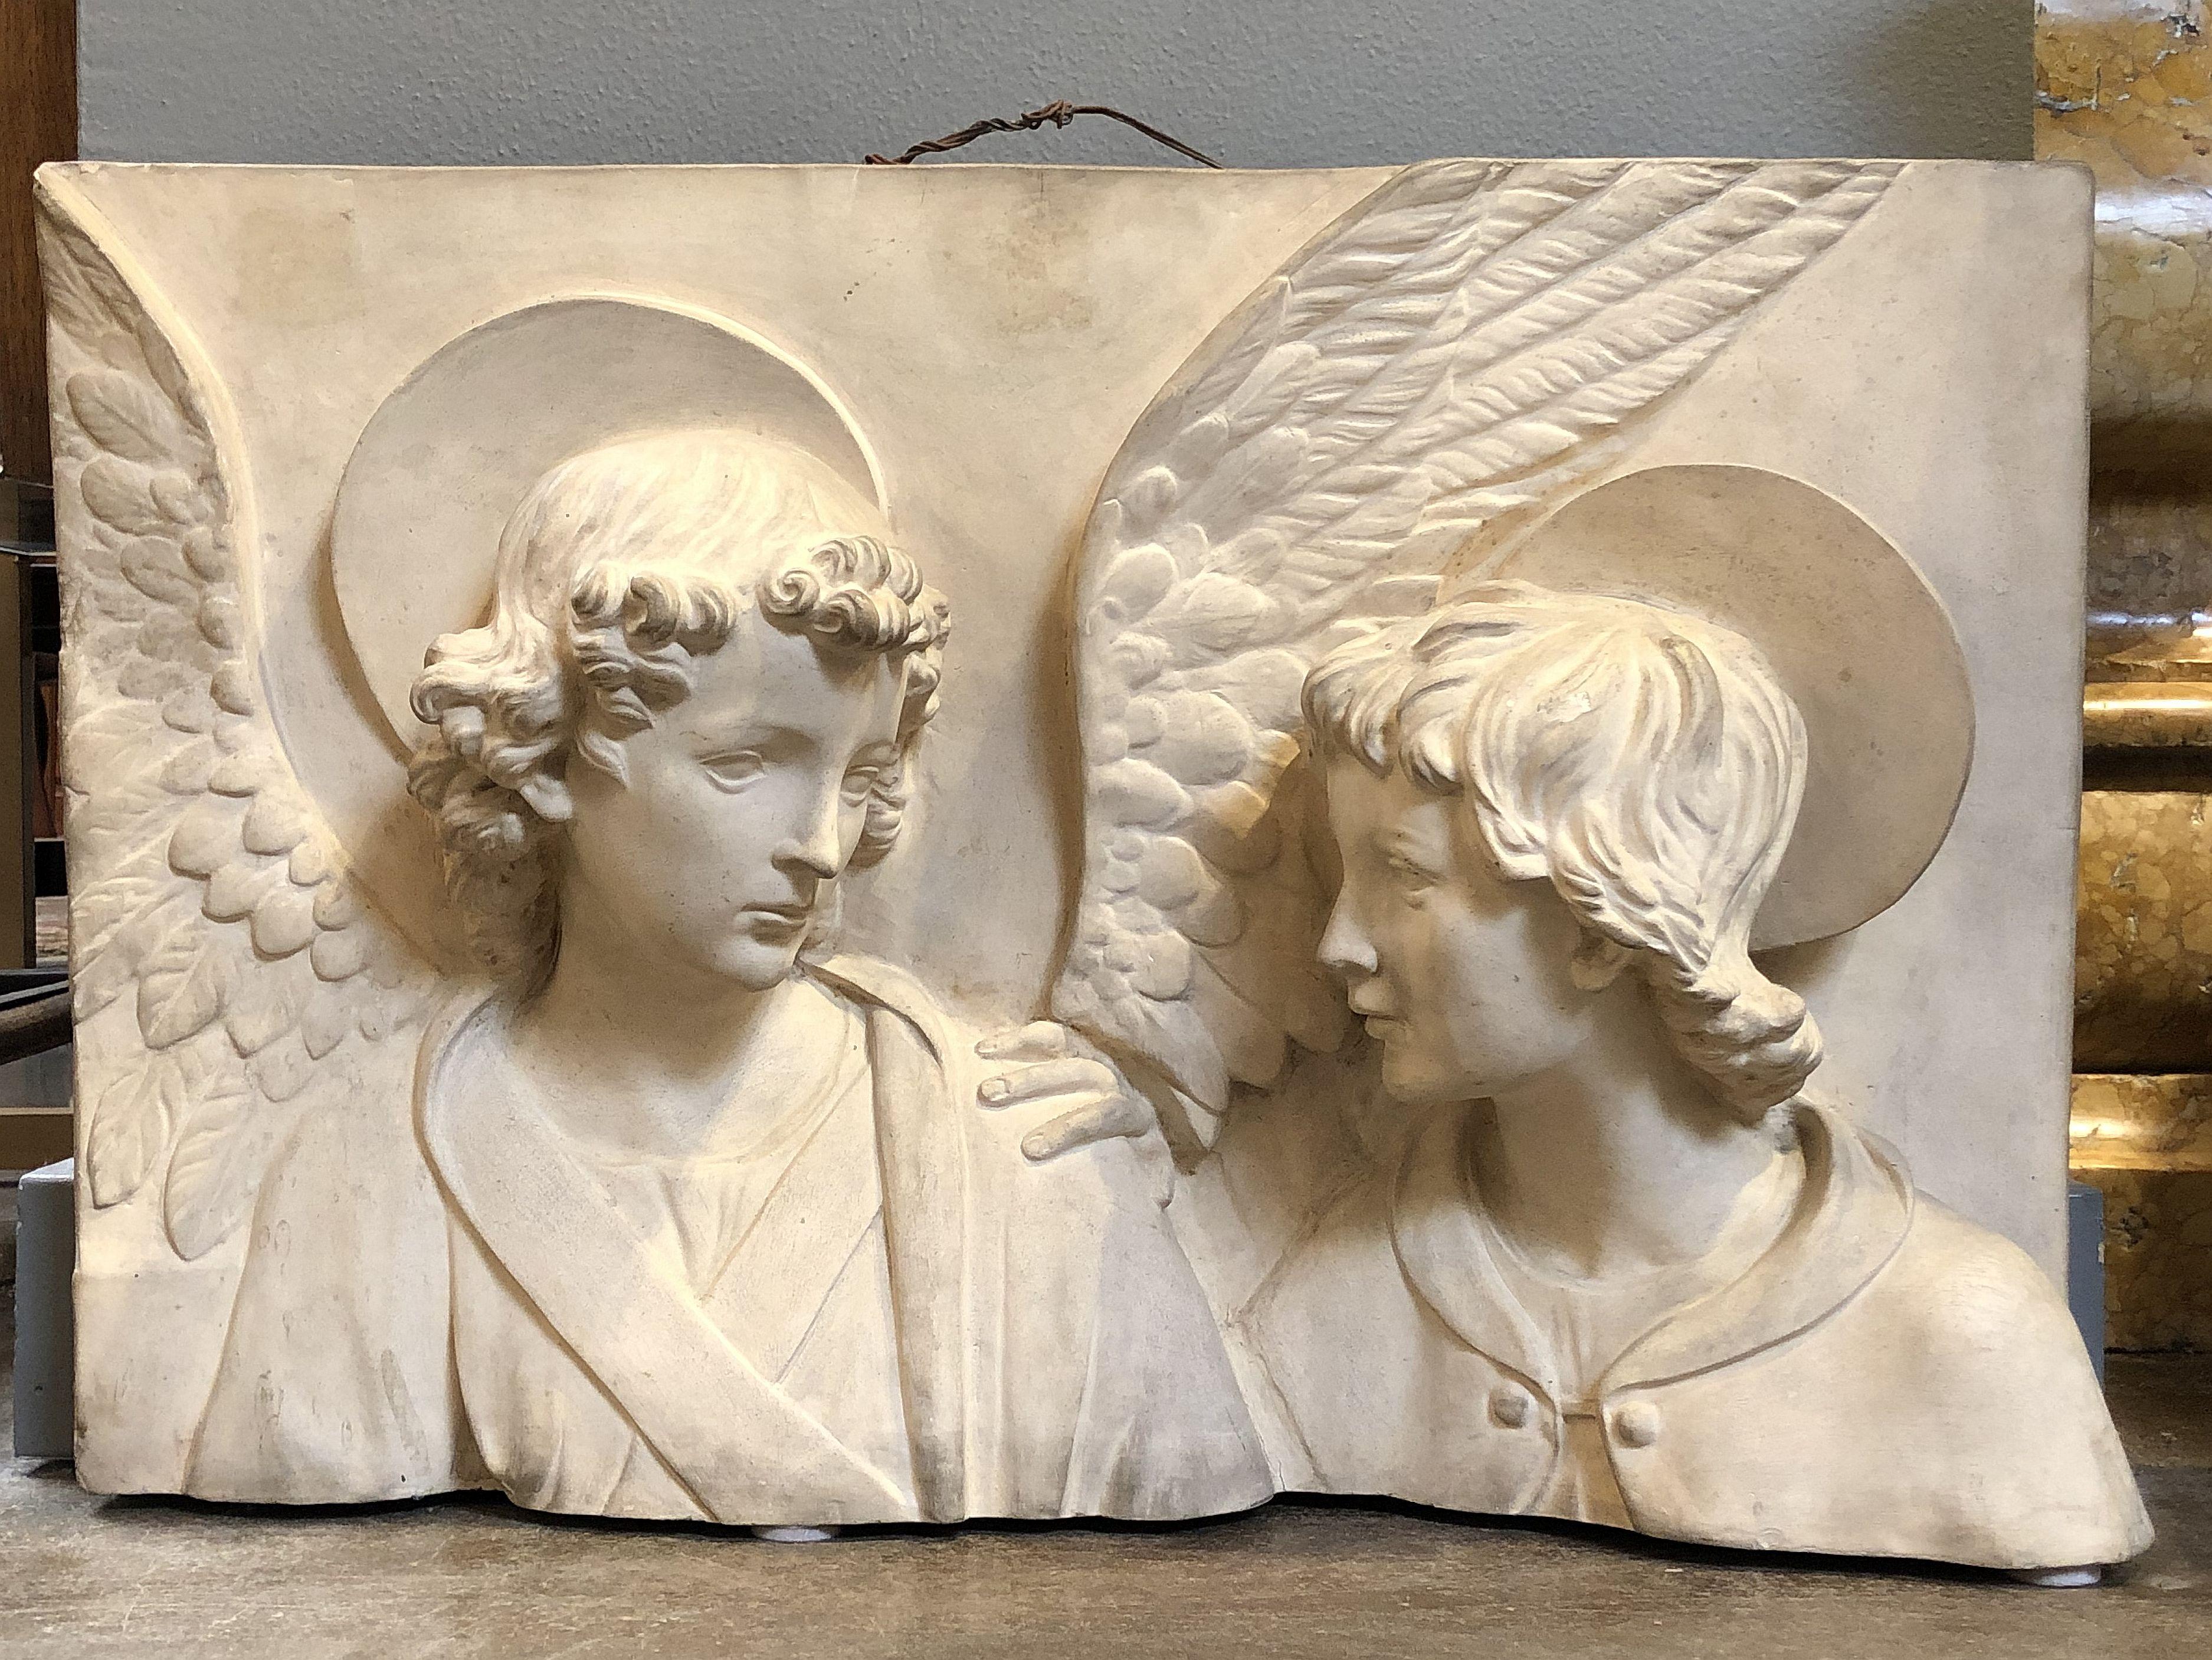 A beautiful Italian bas-relief plaque of terracotta in the manner of Della Robbia, cast as the heads of an angel and a saint
Each figure in religious costume, the angel with wings and the saint with halo.

With impressed mark from one of the